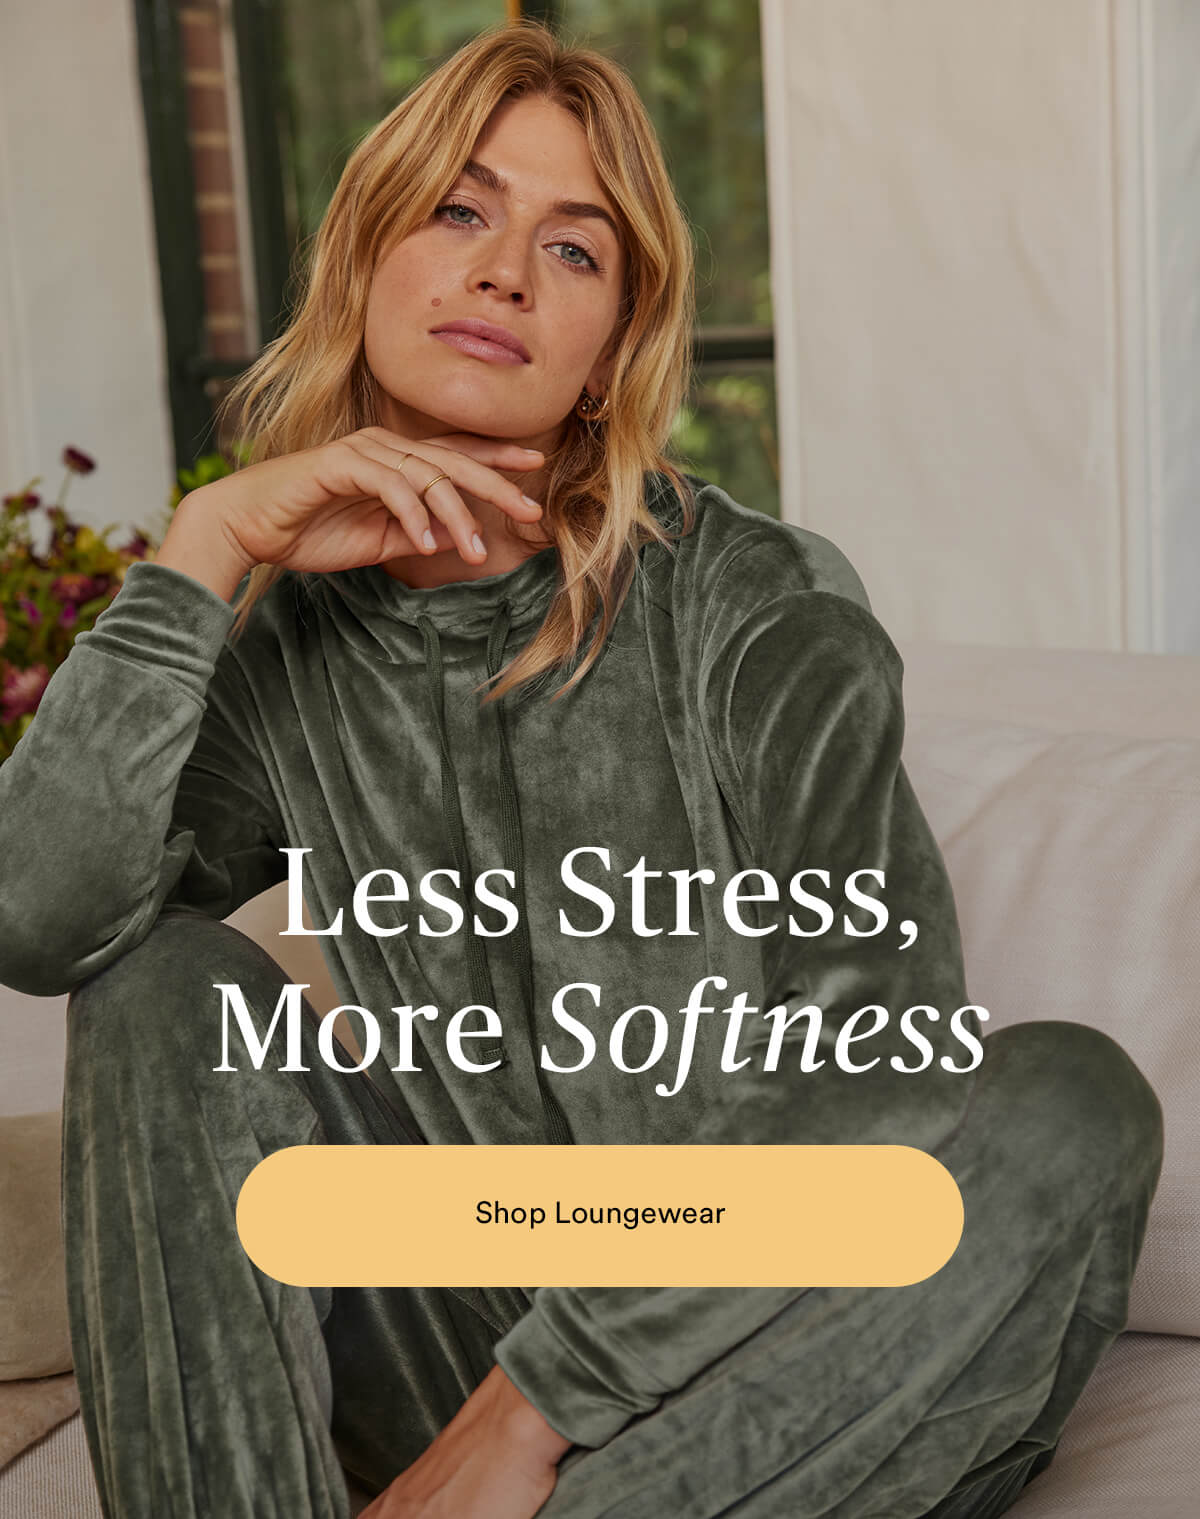 Less stress, more softness. Shop Loungewear. Image of woman wearing The Plush Velour hoodie and pants.